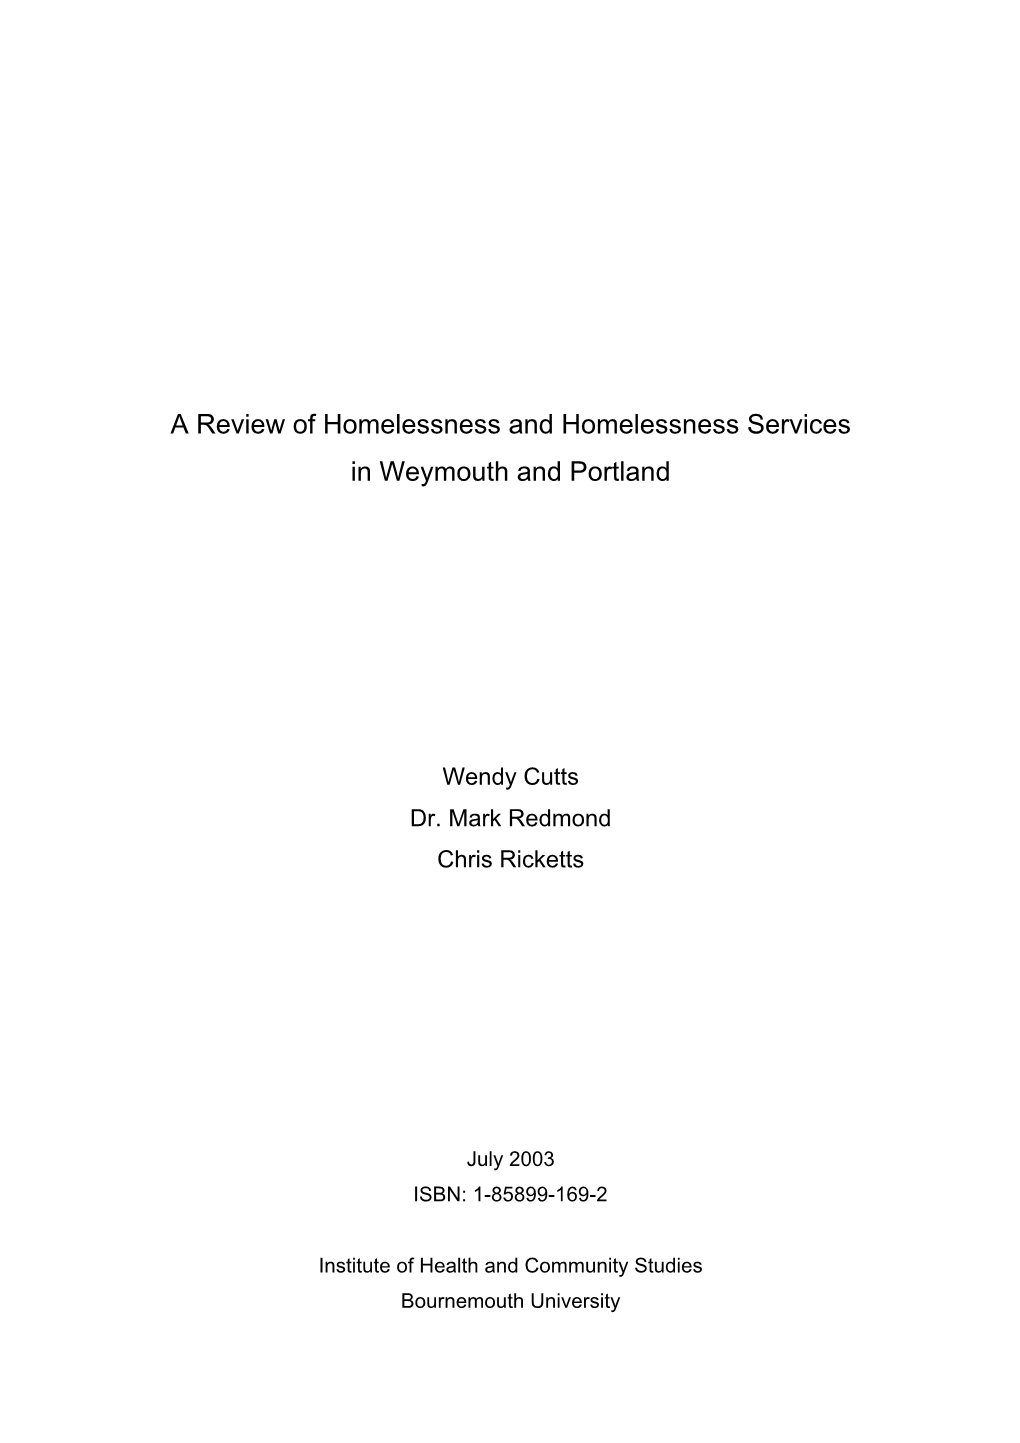 A Review of Homelessness and Homelessness Services in Weymouth and Portland